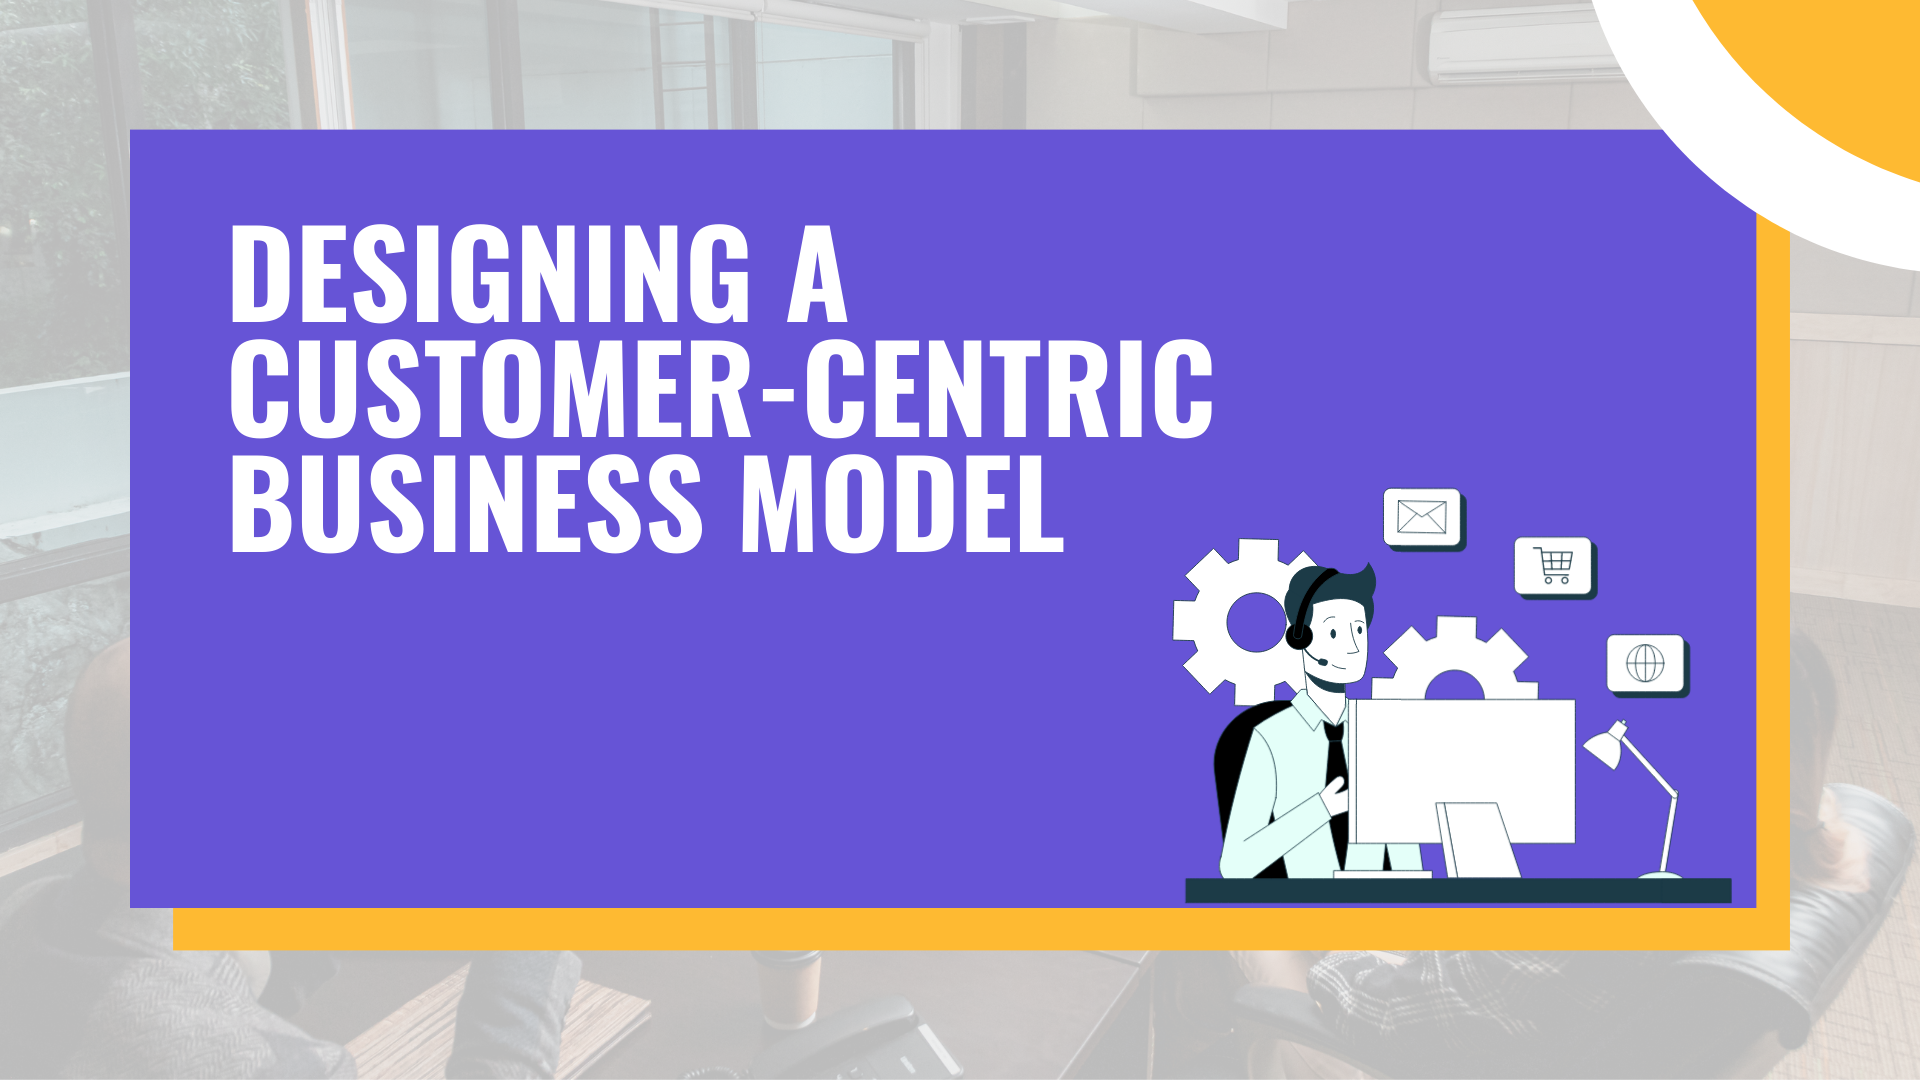 Designing a Customer-Centric Business Model